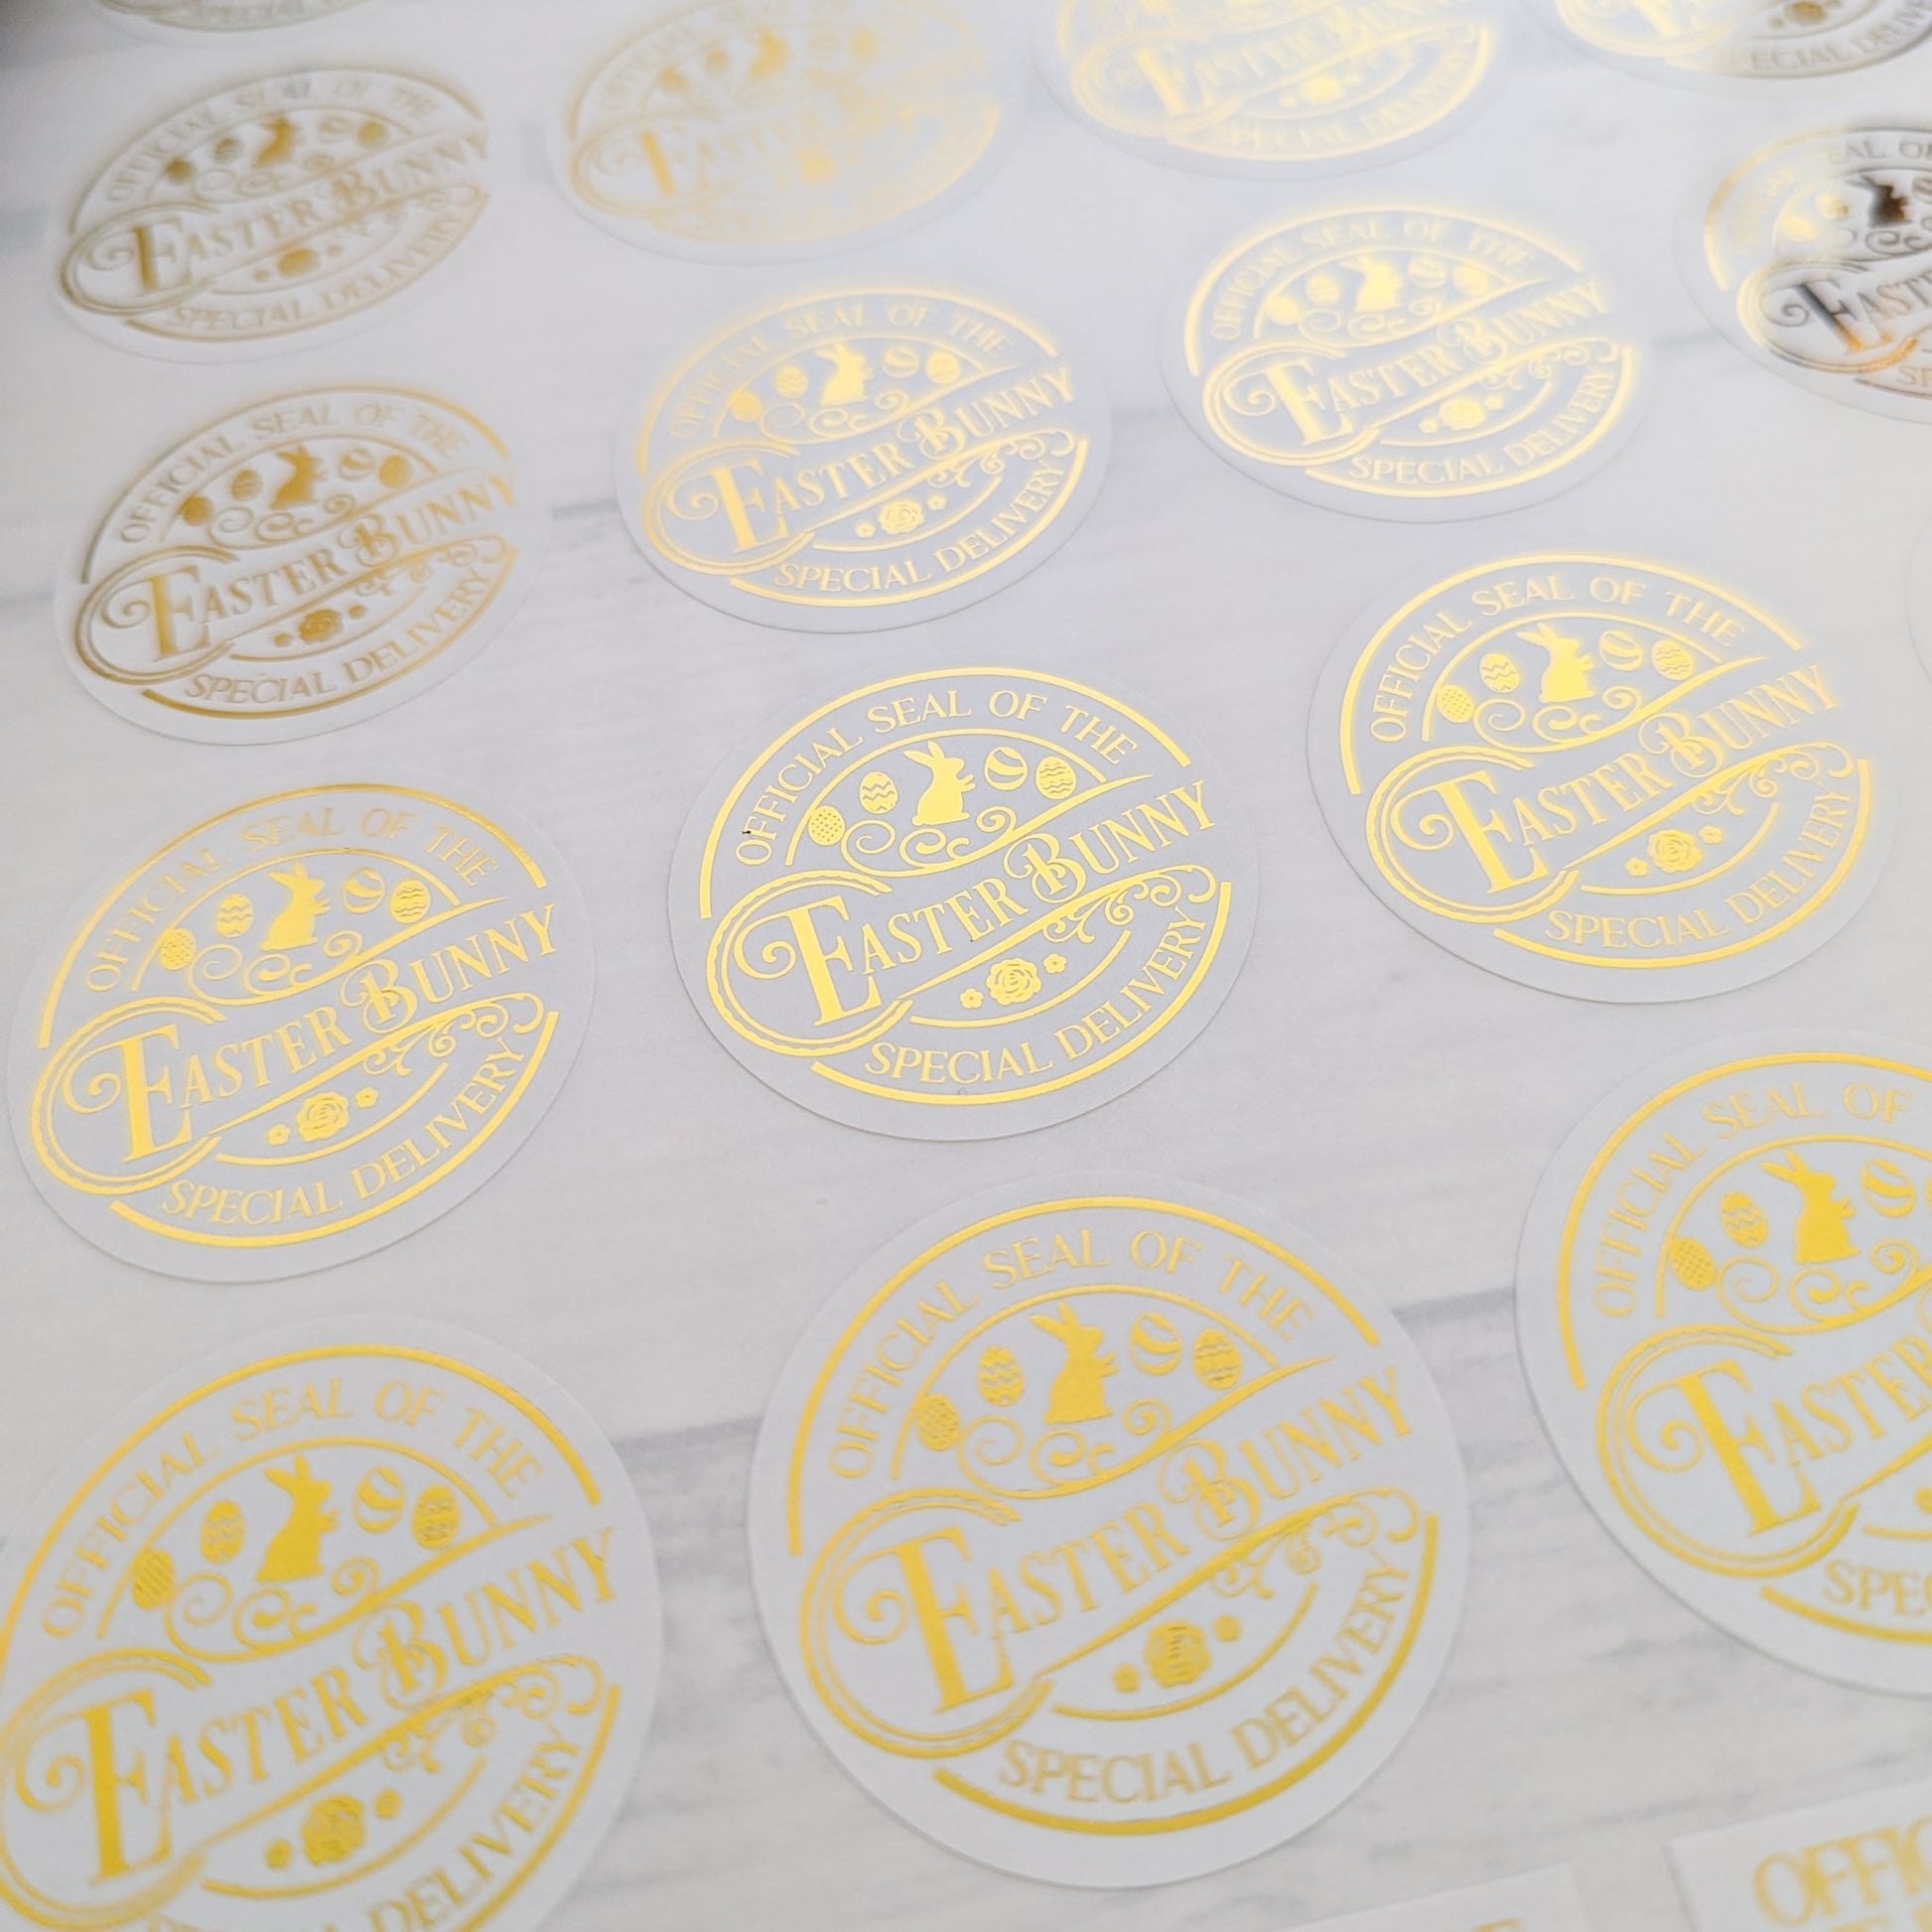 E&L Designs | Custom Foil Stickers Official Seal of the Easter Bunny Stickers